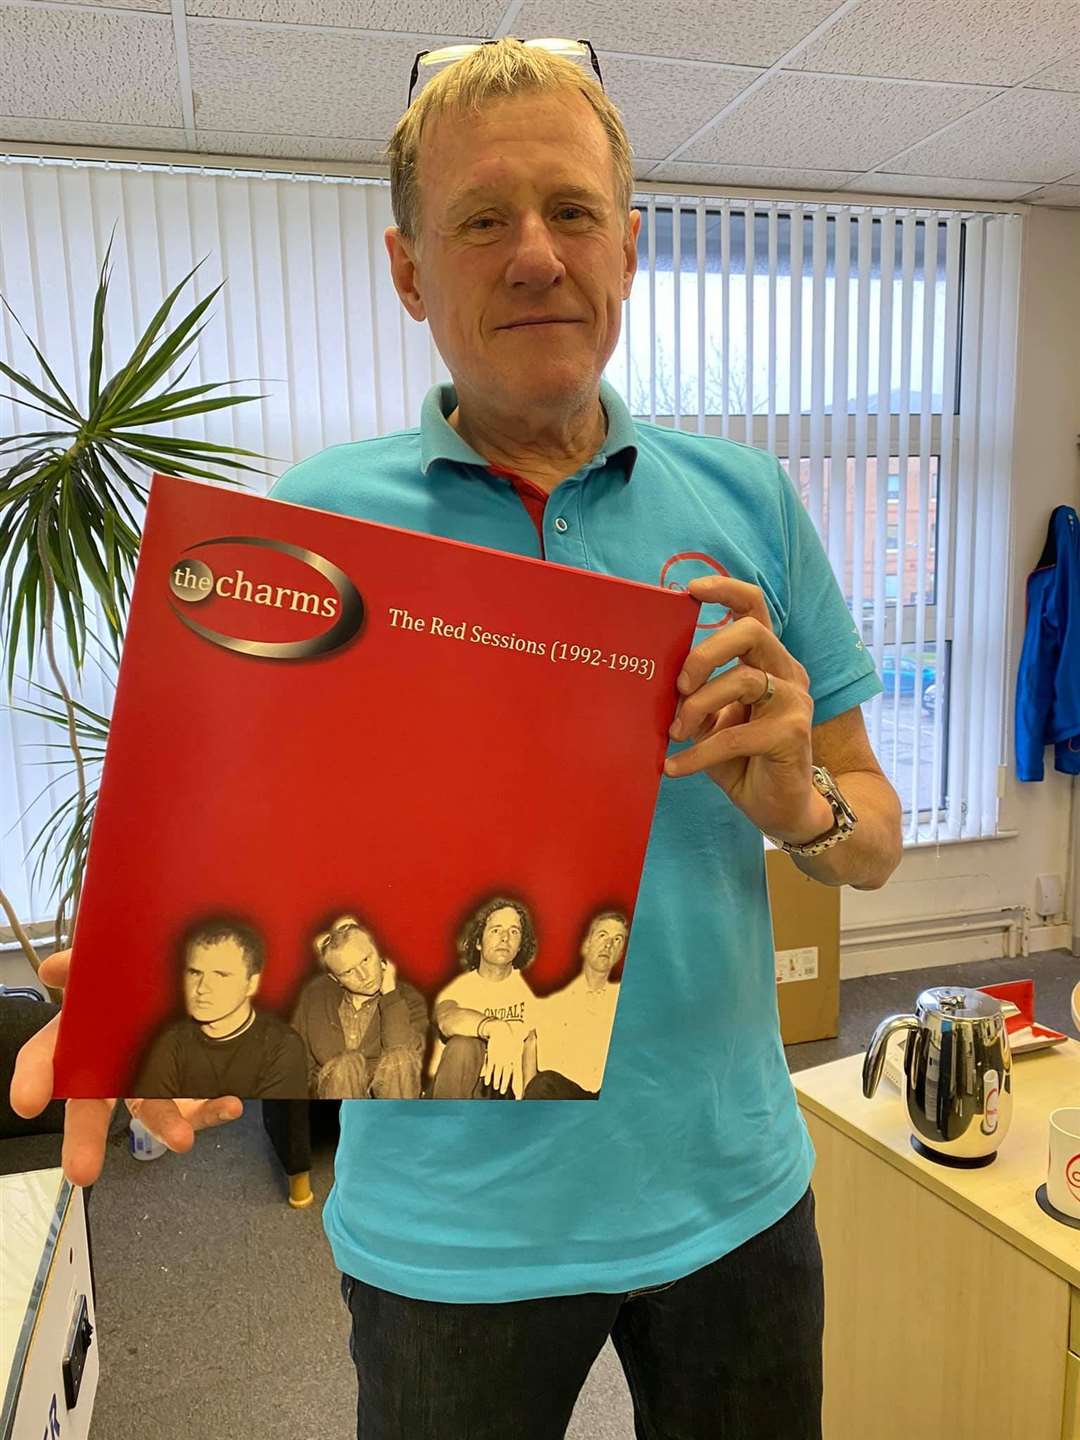 Producer Graham Semark with The Red Sessions the new LP from Sittingbourne and Sheppey 90s band The Charms